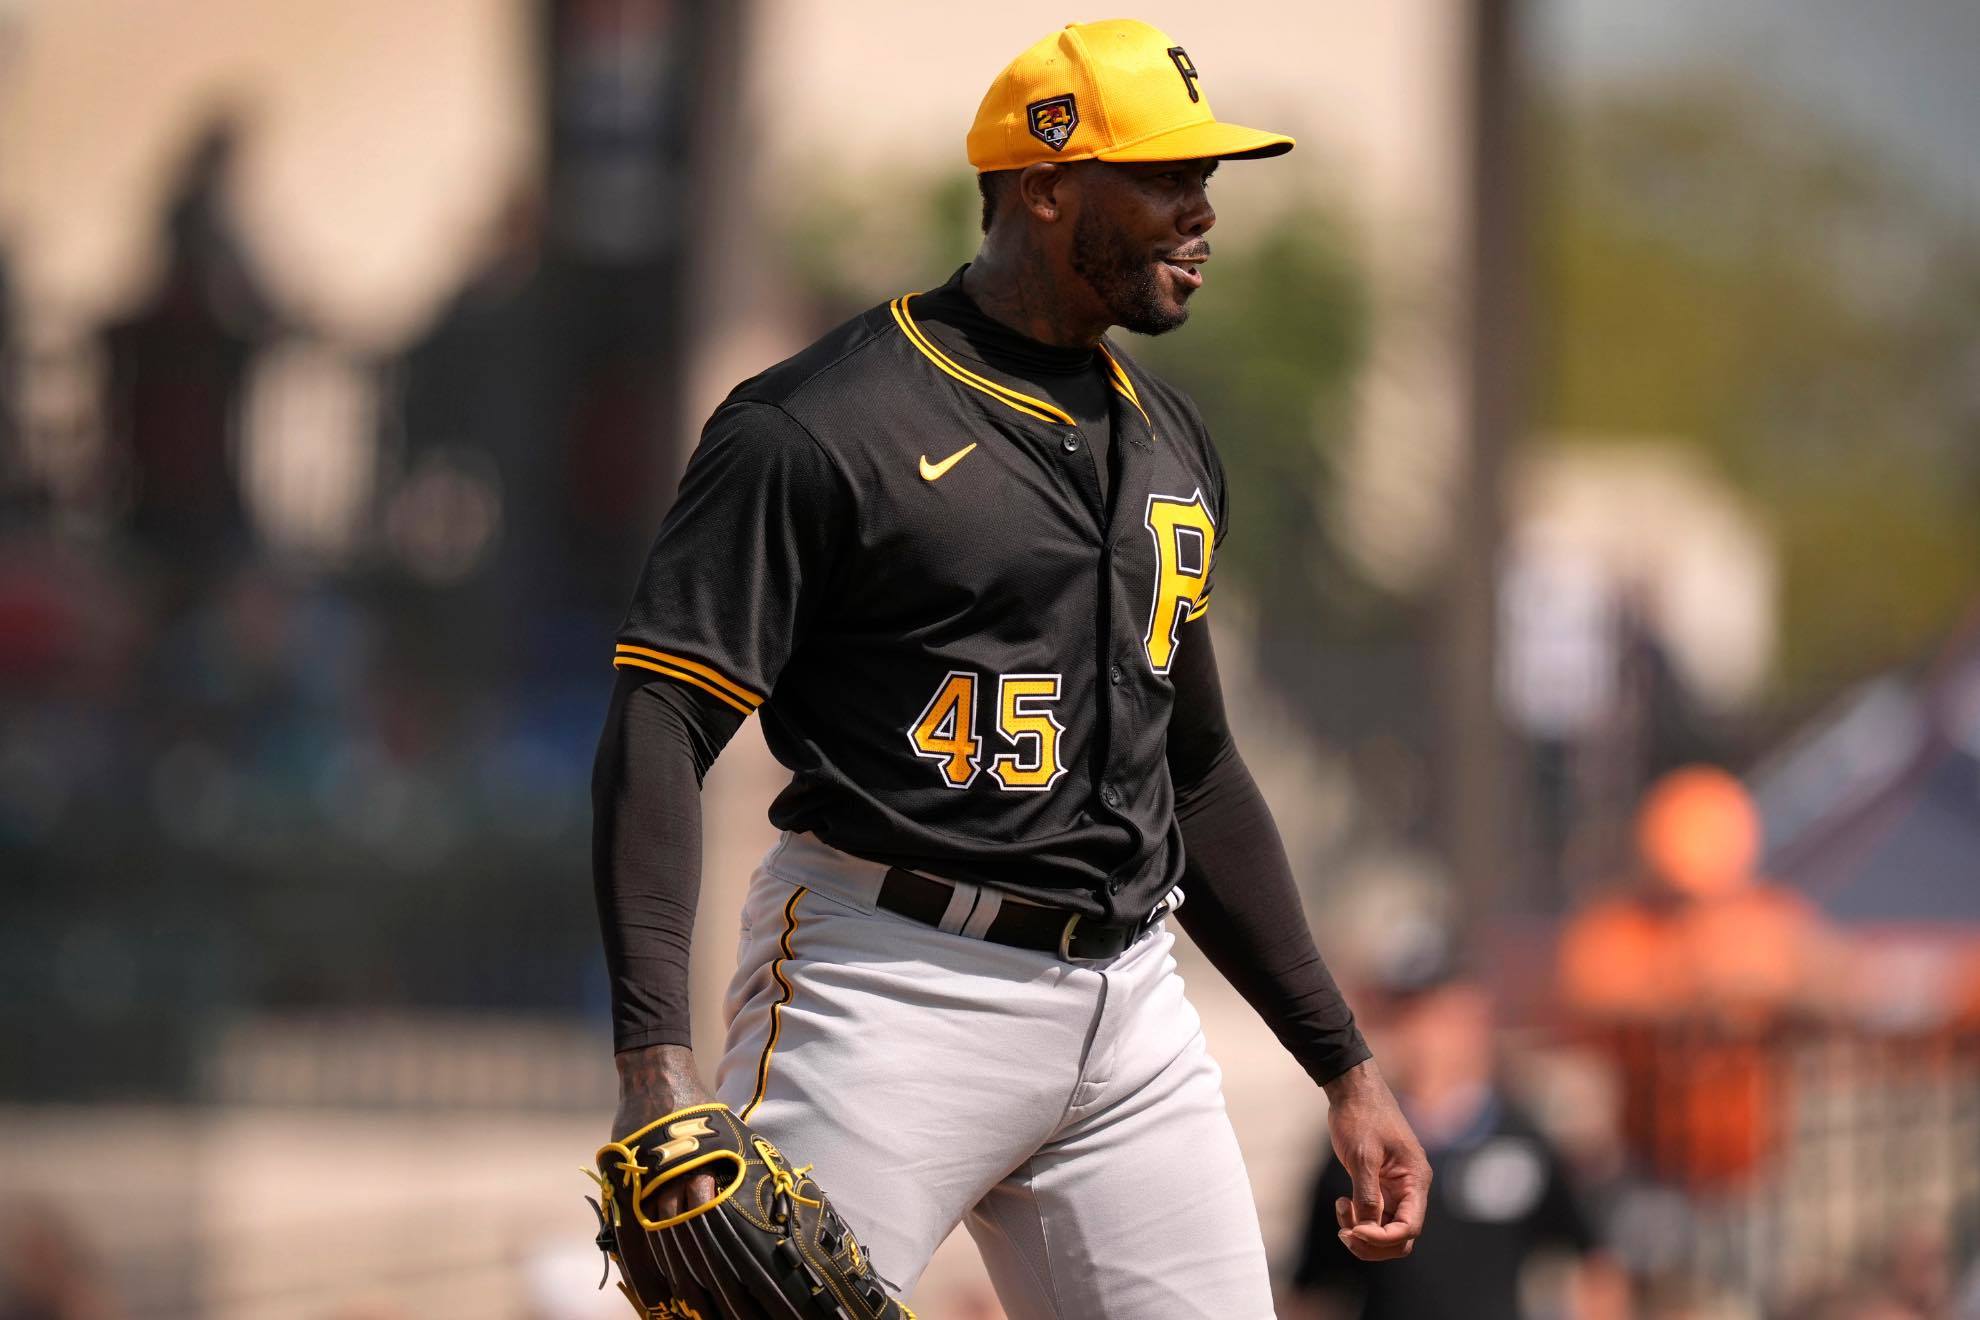 Aroldis Chapman signed with the Pittsburgh Pirates last offseason